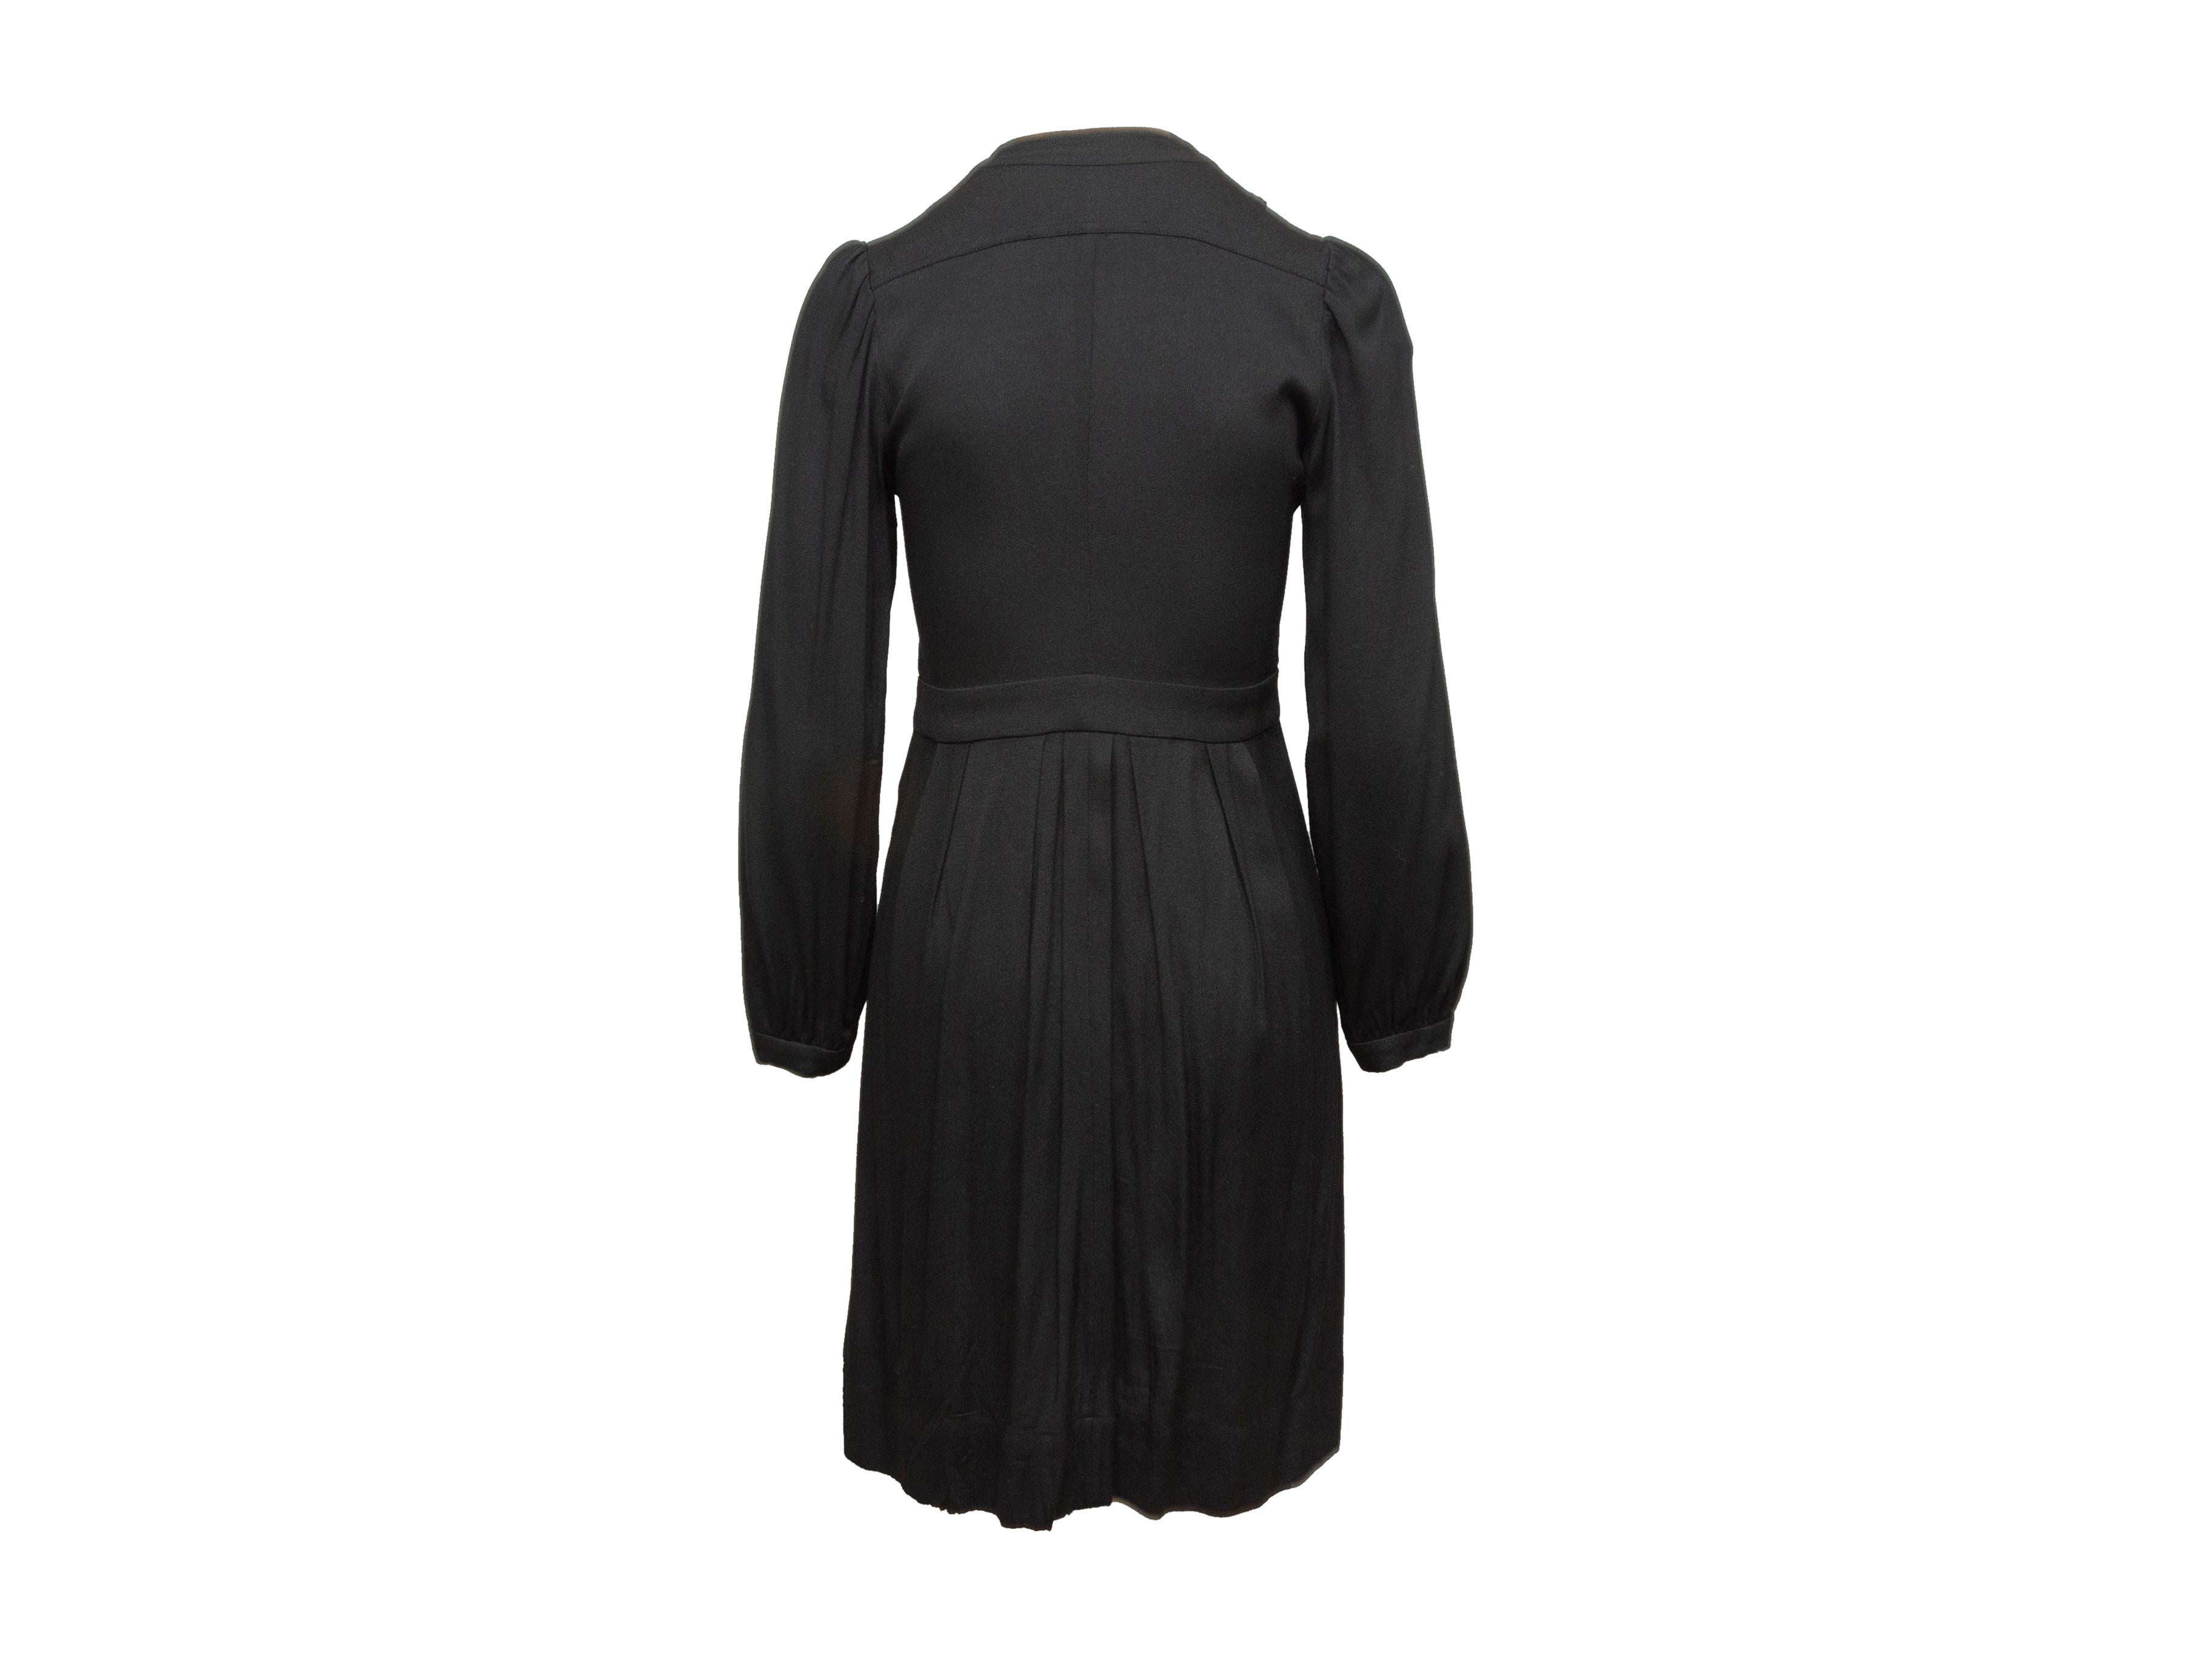 Product details: Black long sleeve pleated dress by Etoile Isabel Marant. V-neck. Button closures at bust. Designer size 36. 26